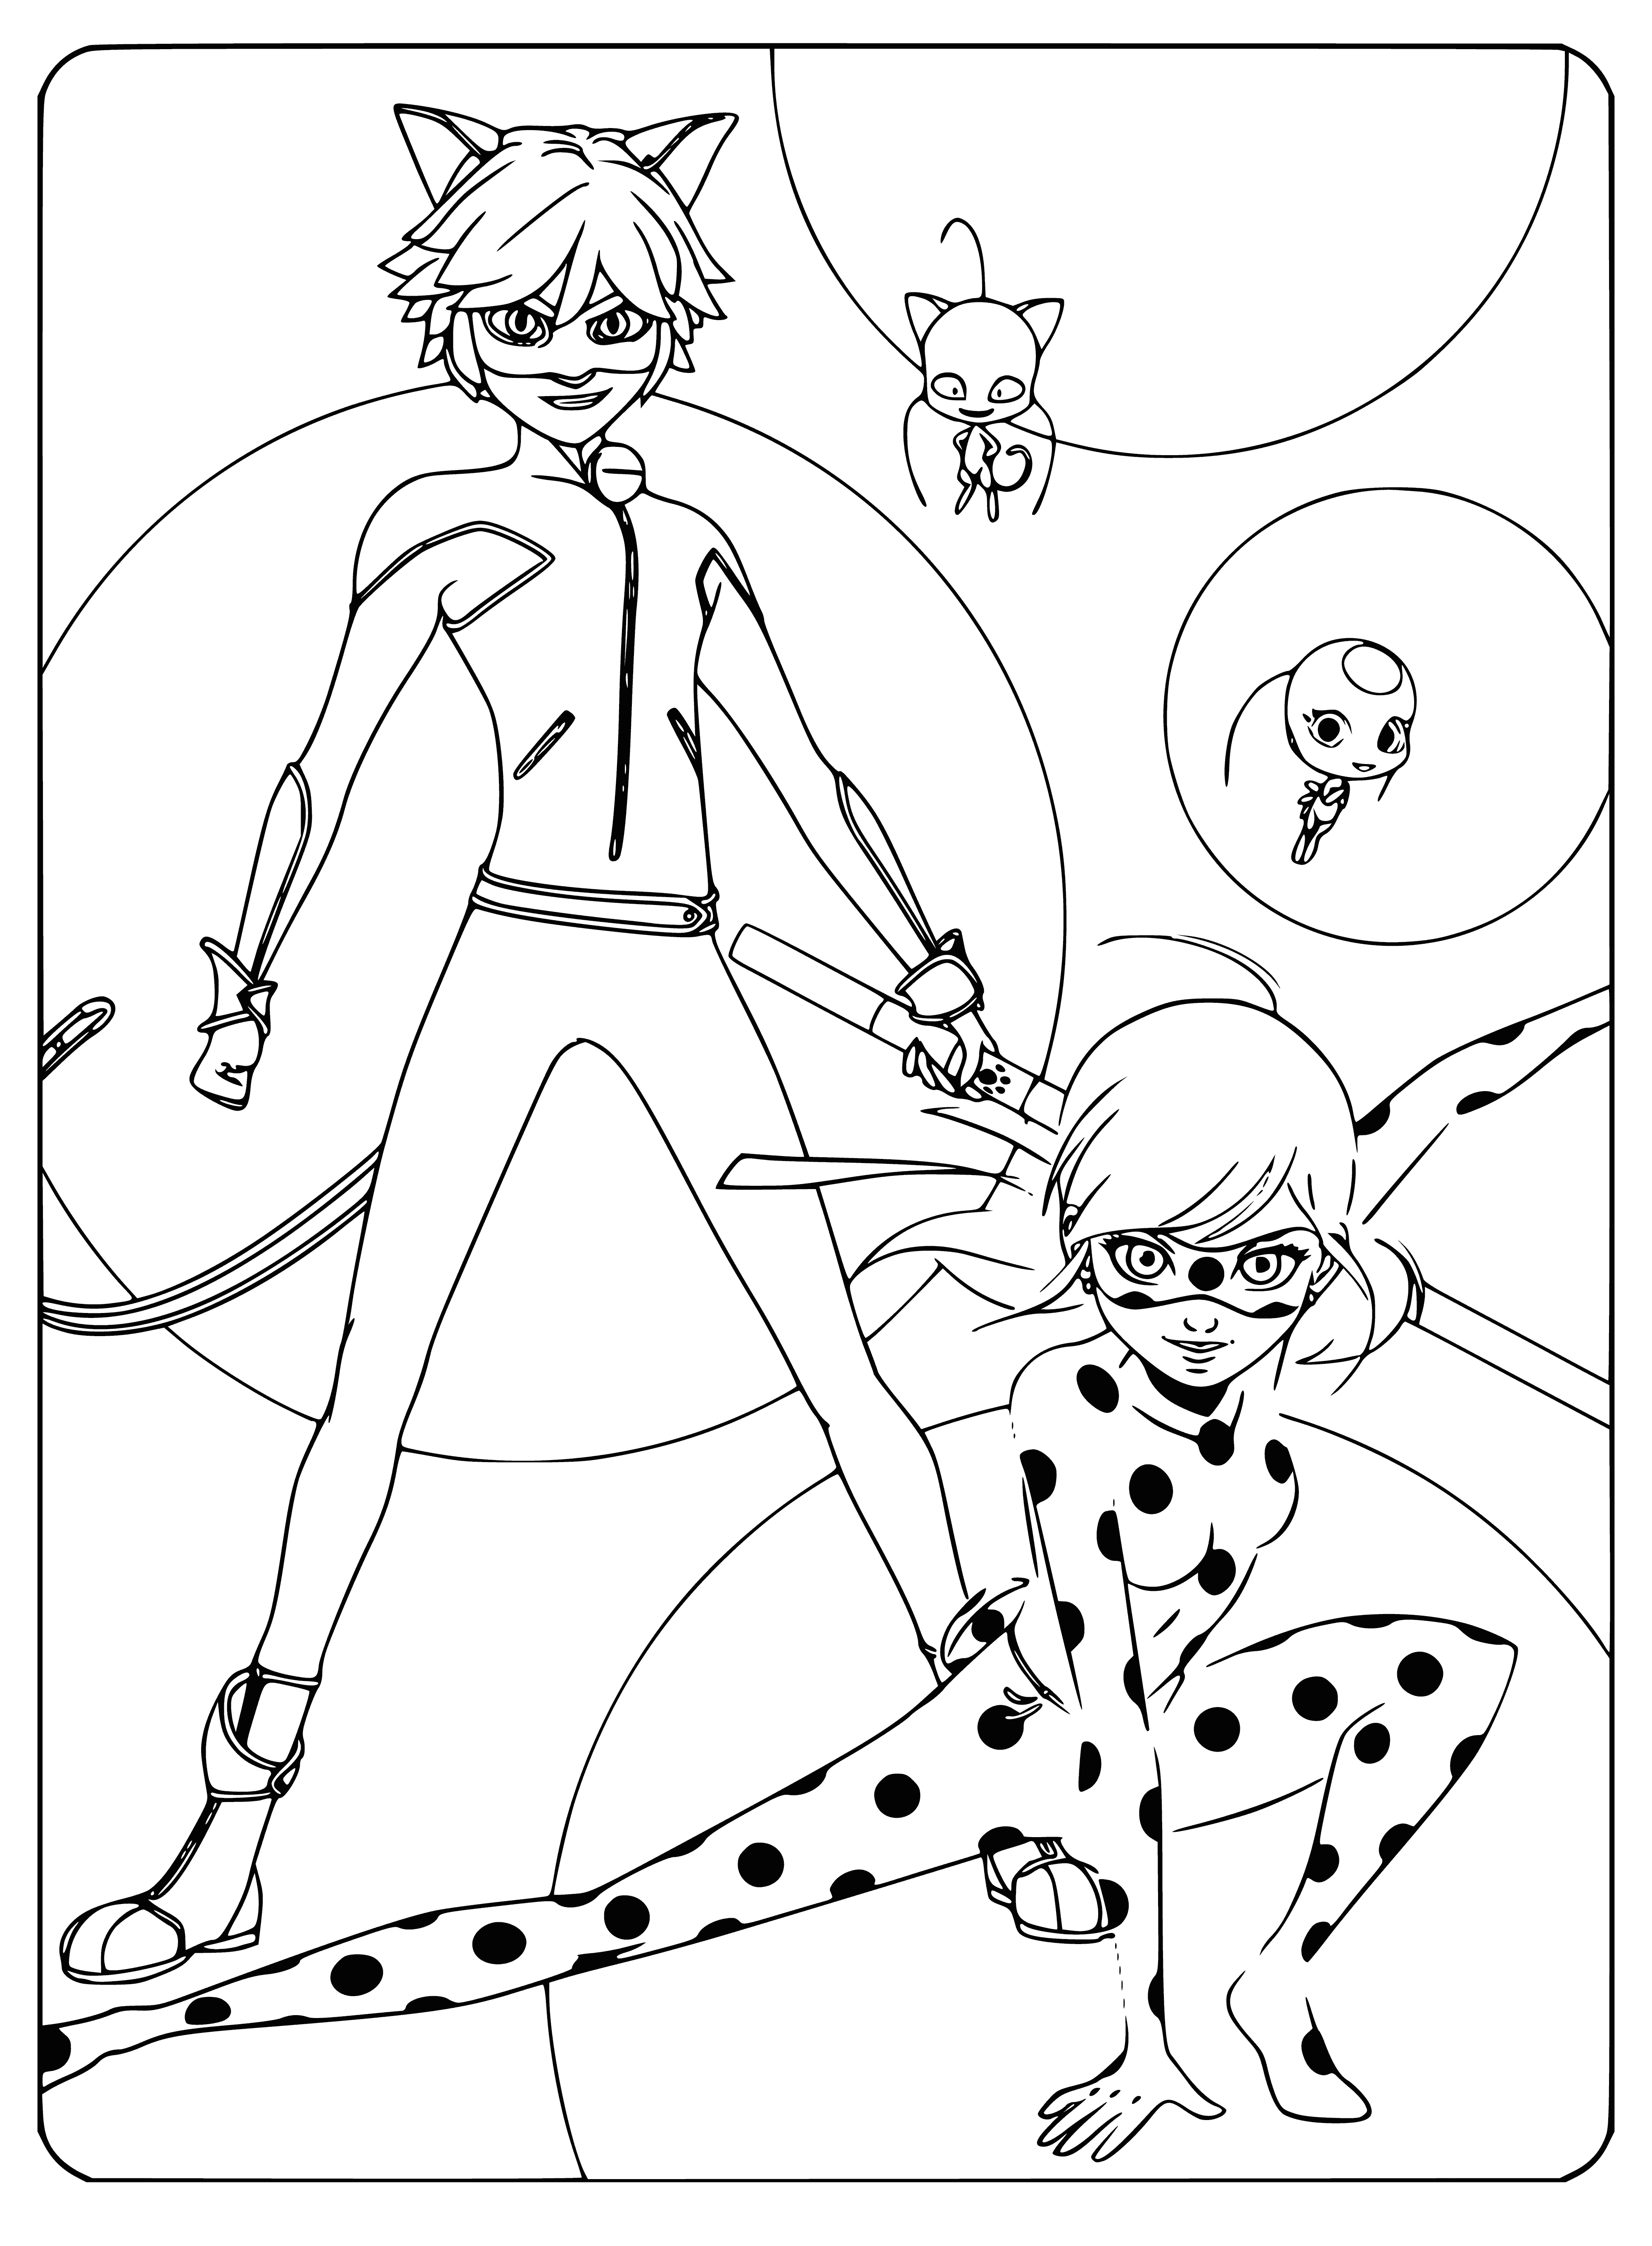 coloring page: Super Cat, Lady Bug, and Tikki are fighting crime and using their powers to make their city safe. #CrimeFightingHeroes